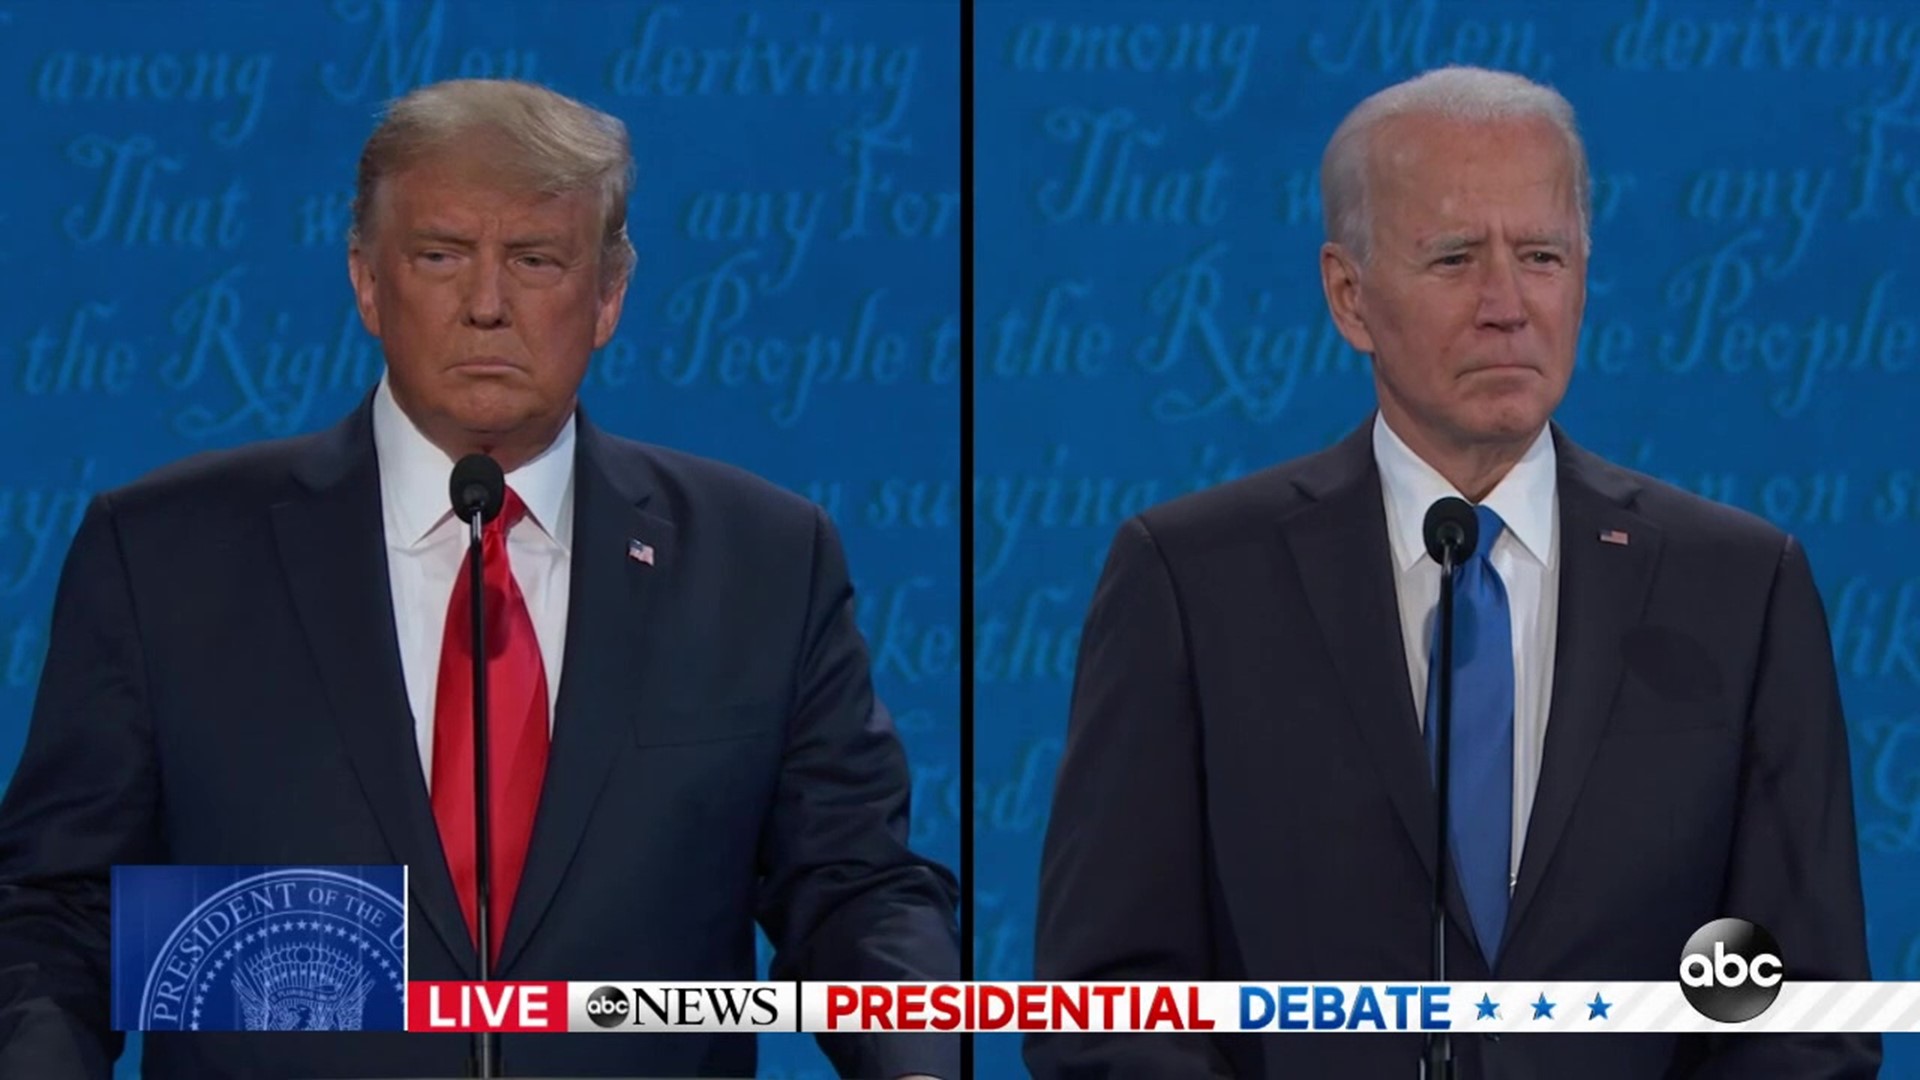 Experts said both Trump and Biden appealed to their bases and stayed on message.